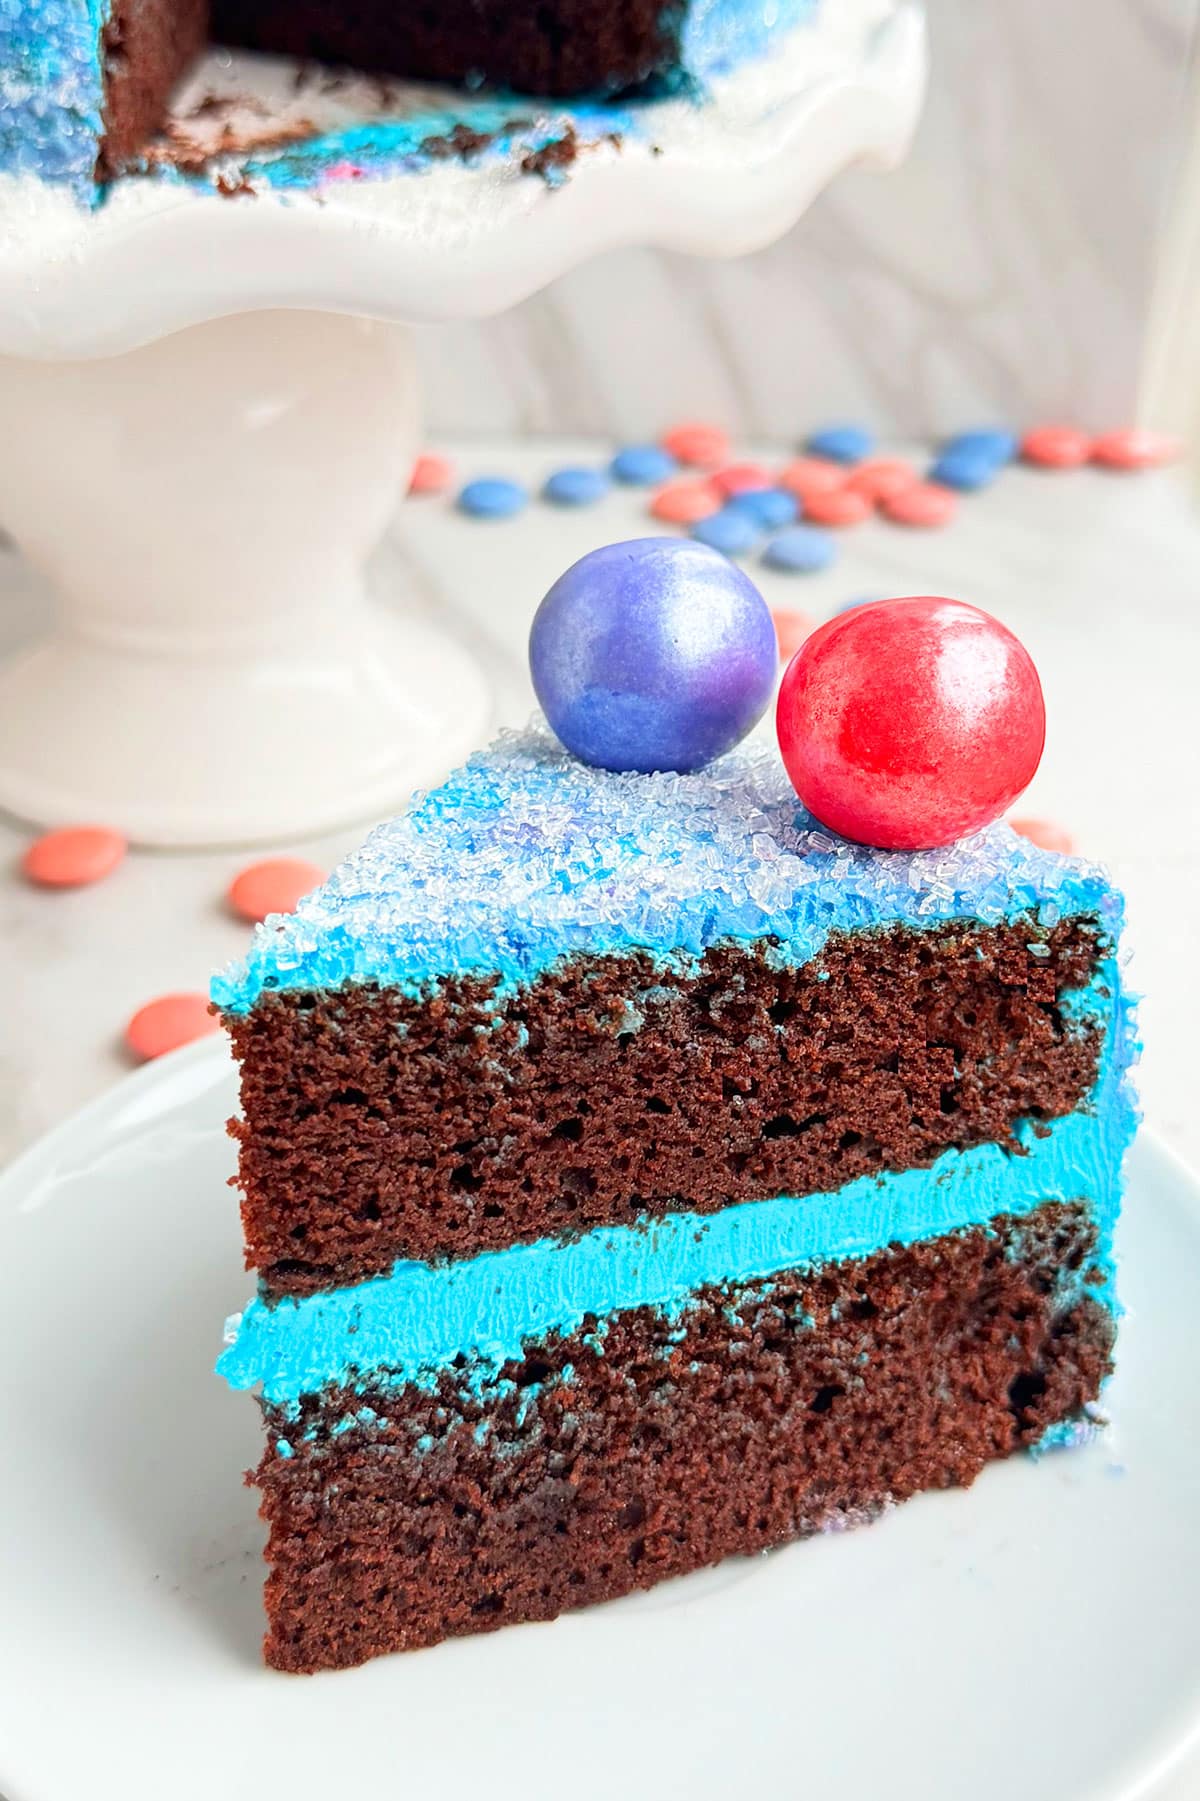 Slice of Chocolate Cake With Blue Buttercream Icing on White Dish. 